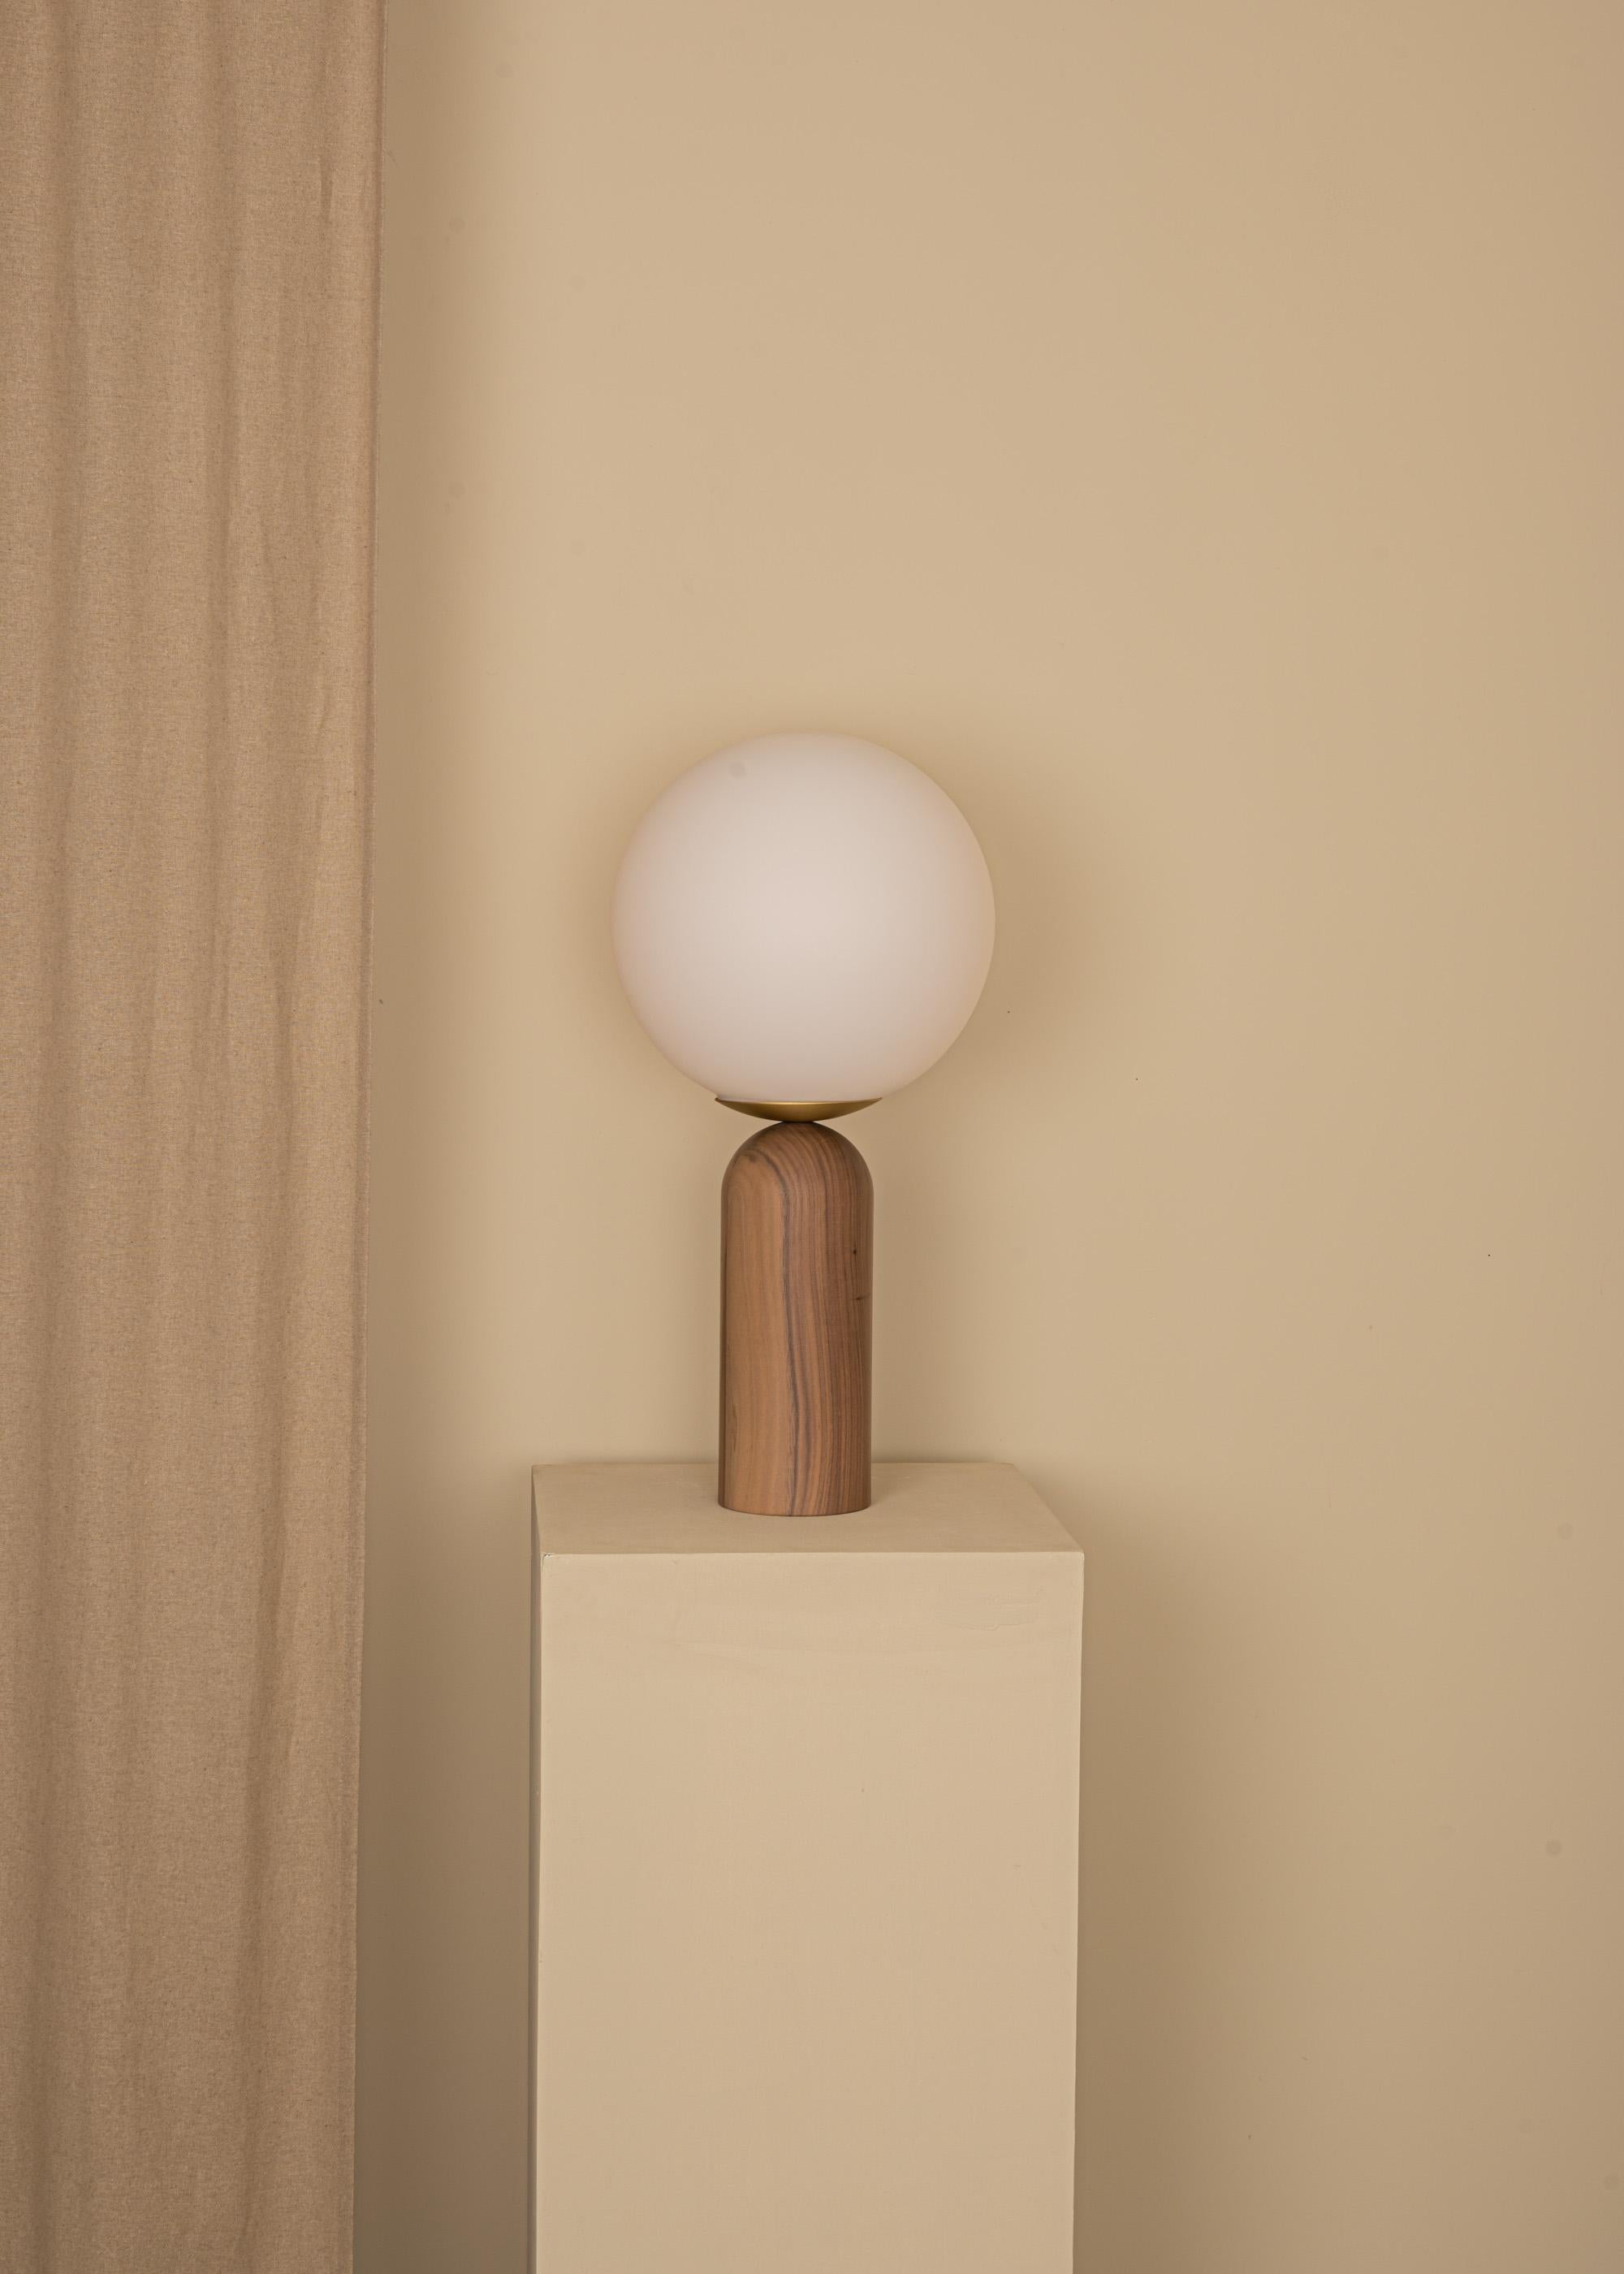 Walnut and Brass Atlas Table Lamp by Simone & Marcel
Dimensions: Ø 30 x H 60 cm.
Materials: Glass, brass and walnut.

Also available in different marble, wood and alabaster options and finishes. Custom options available on request. Please contact